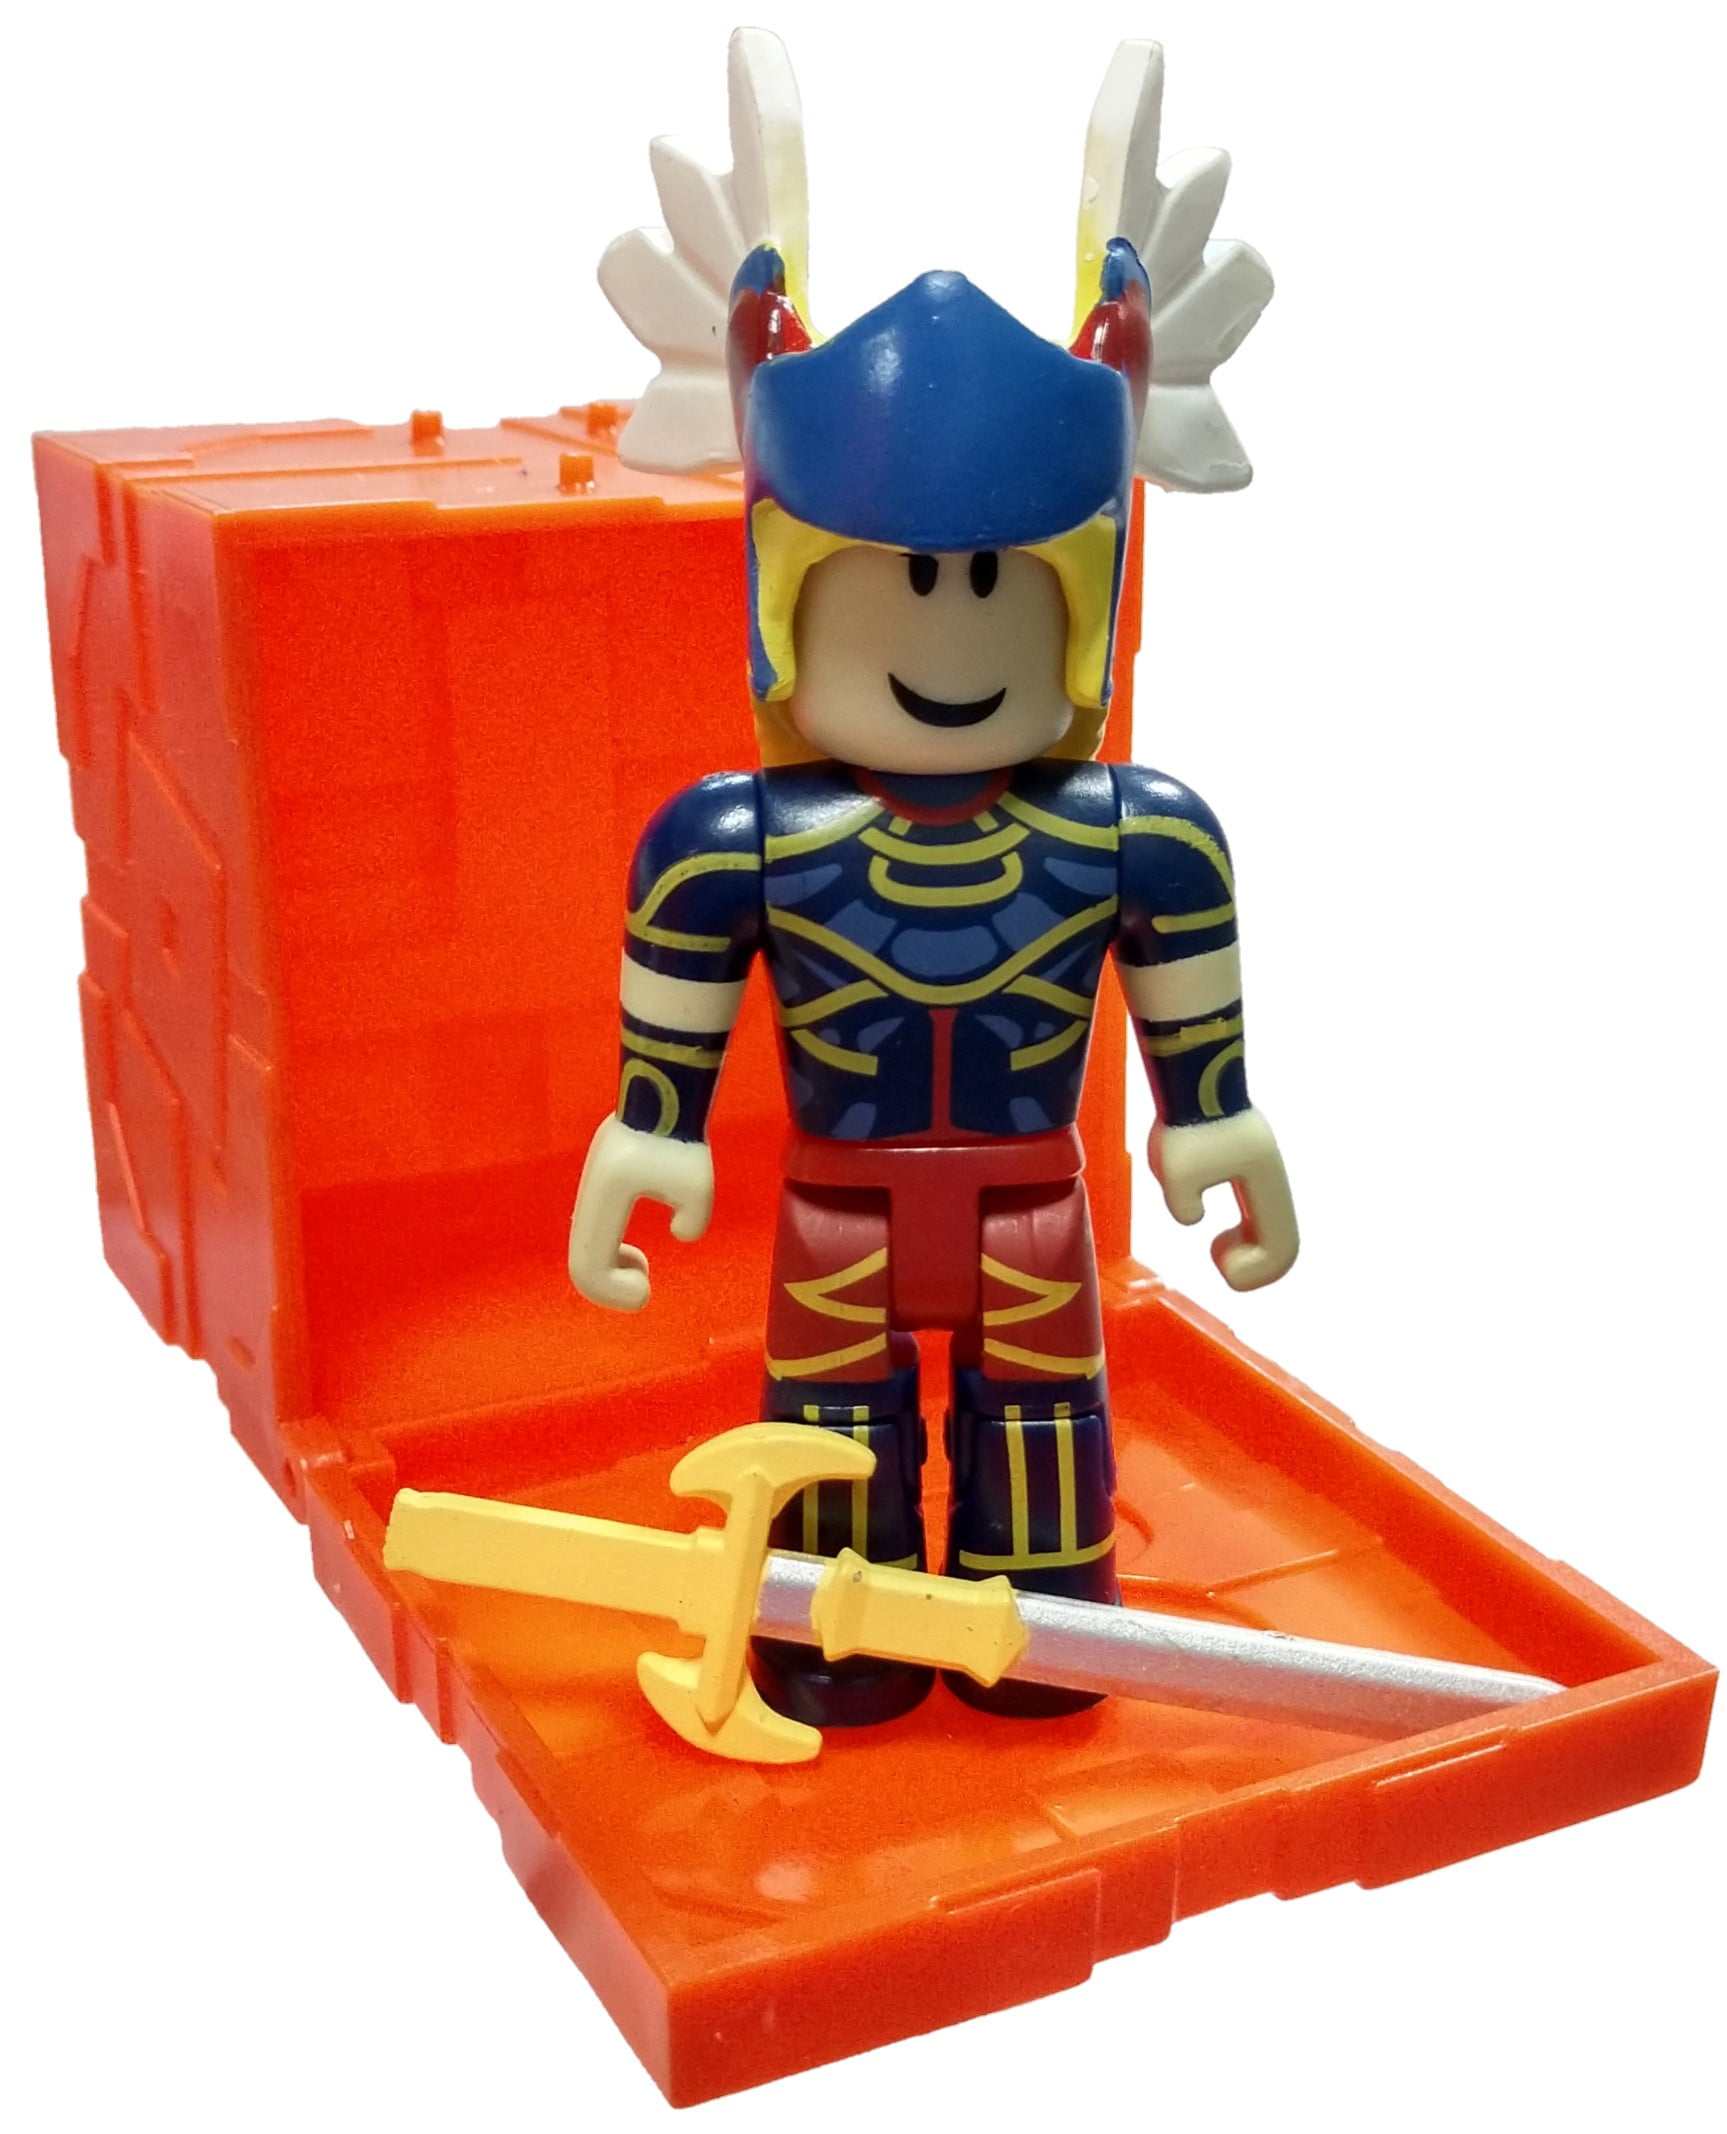 Roblox Series 6 Summoner Tycoon Valkyrie Mini Figure With Orange Cube And Online Code No Packaging Walmart Com Walmart Com - new pet tycoon roblox